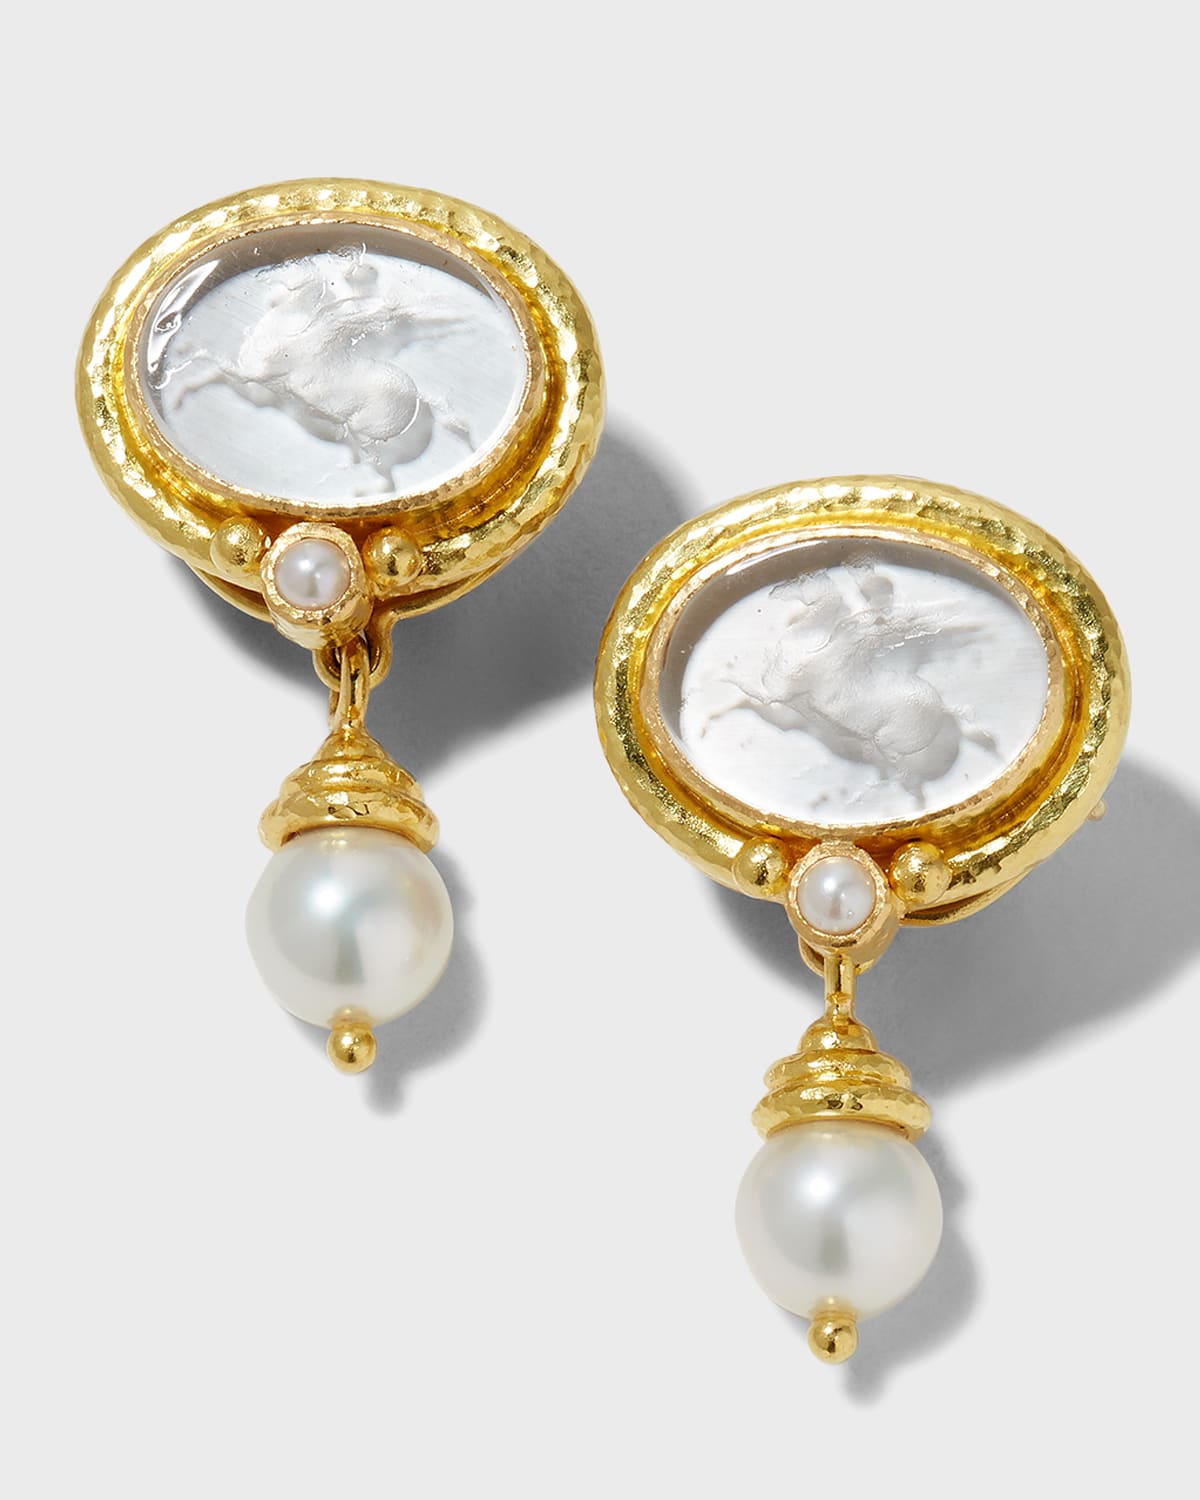 Pegasus Intaglio Clip/Post Earrings with Pearl Drop, White